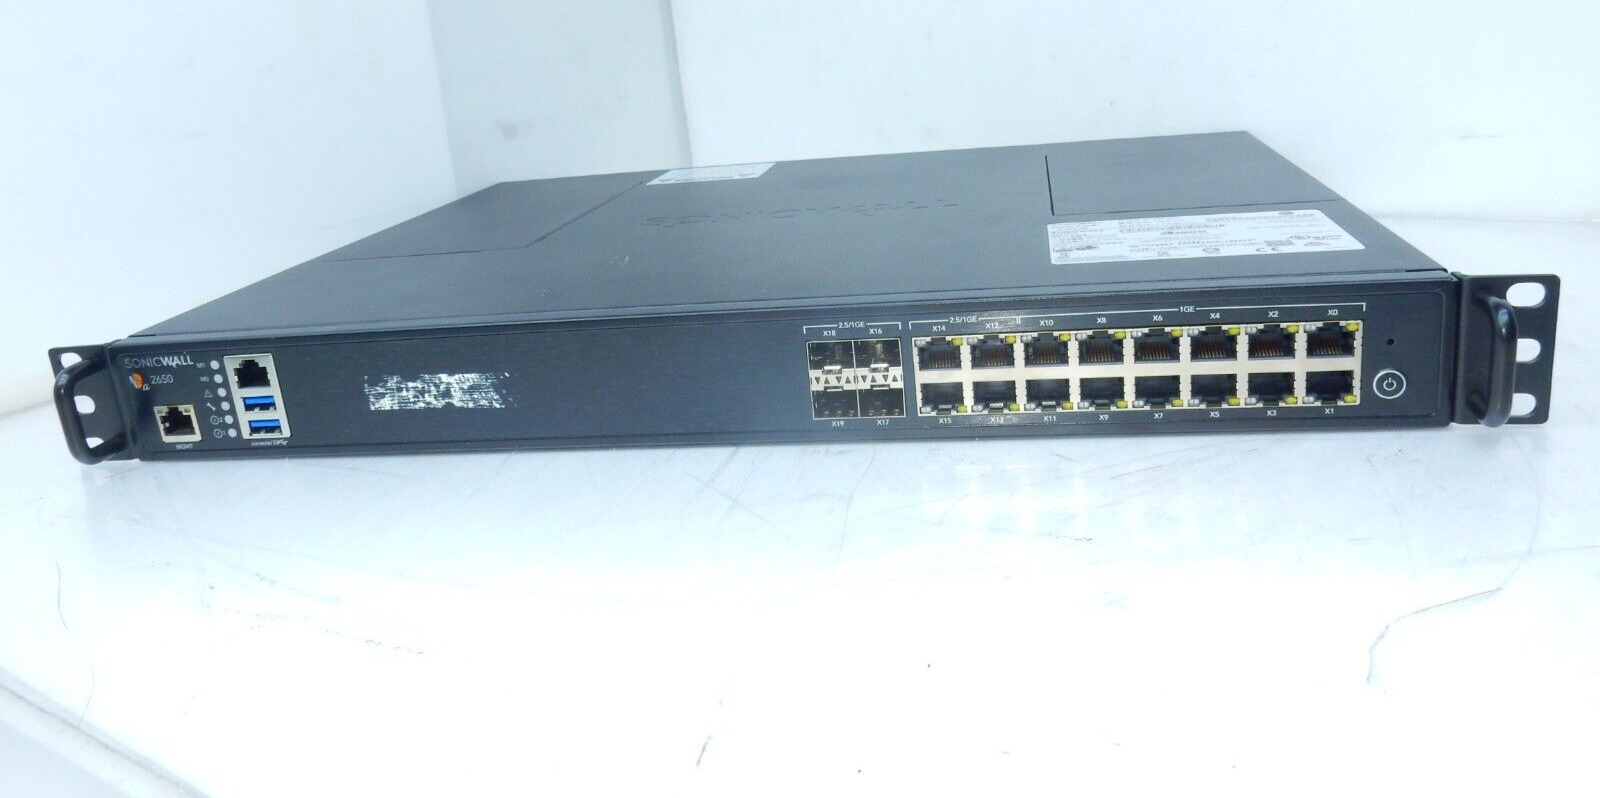 SONICWALL NSA2650 NETWORK SECURITY APPLIANCE 1RK38-0C8 NOT TRANSFER READY  T7-C8